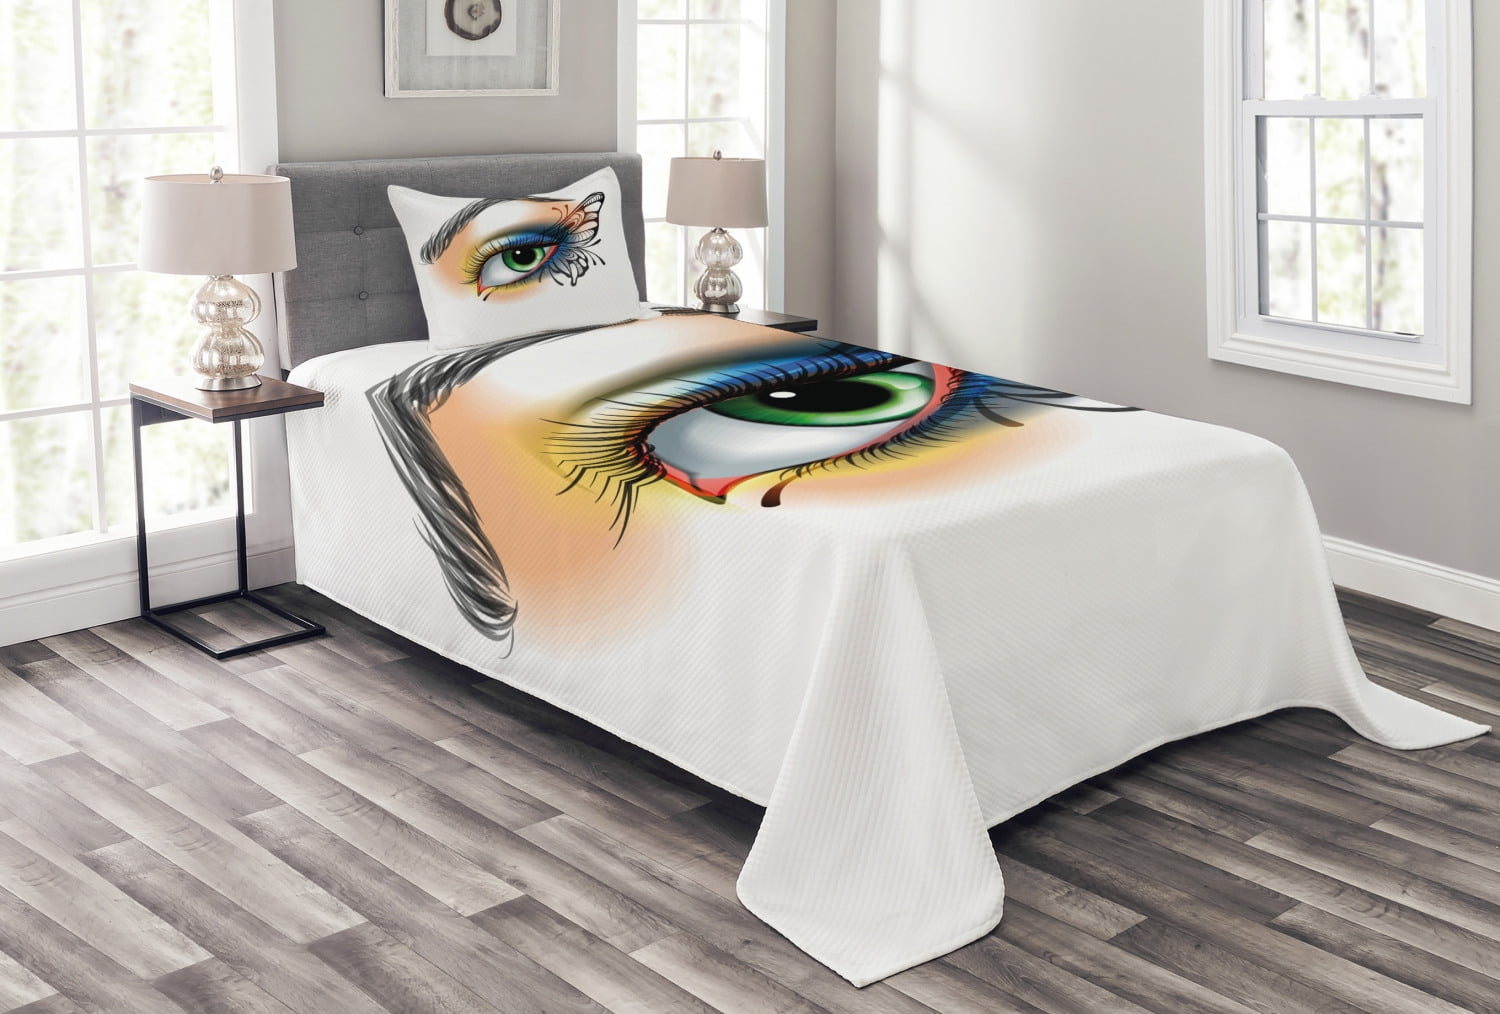 Butterflies and Floral Ornamanets Fantasy Design Colorful Vibrant Wings Artwork Multicolor Twin Size Soft Comfortable Top Sheet Decorative Bedding 1 Piece Ambesonne Colorful Flat Sheet